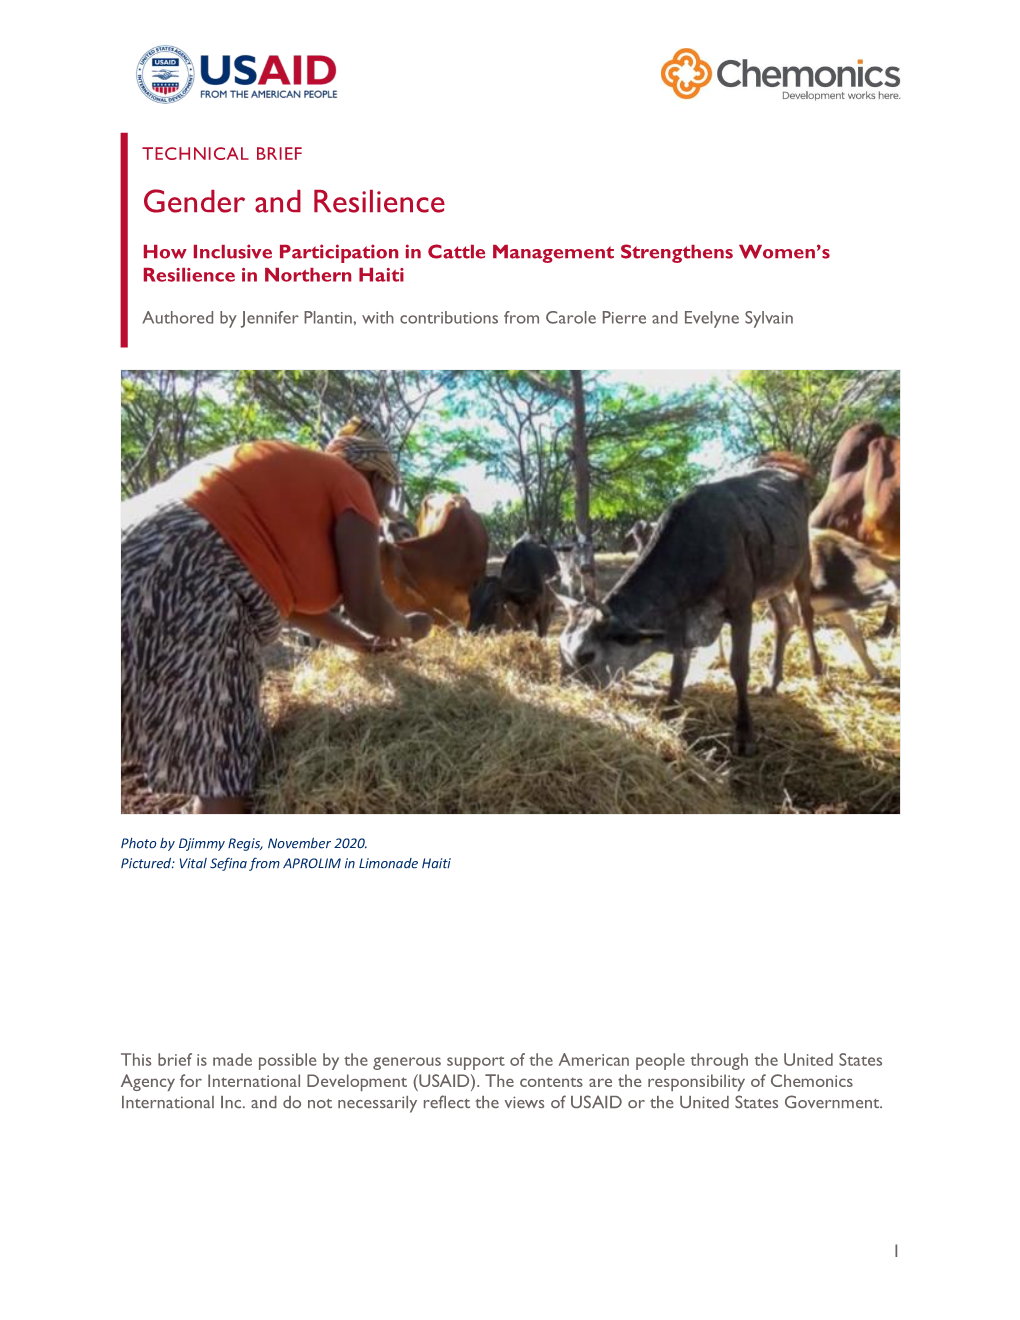 Gender and Resilience